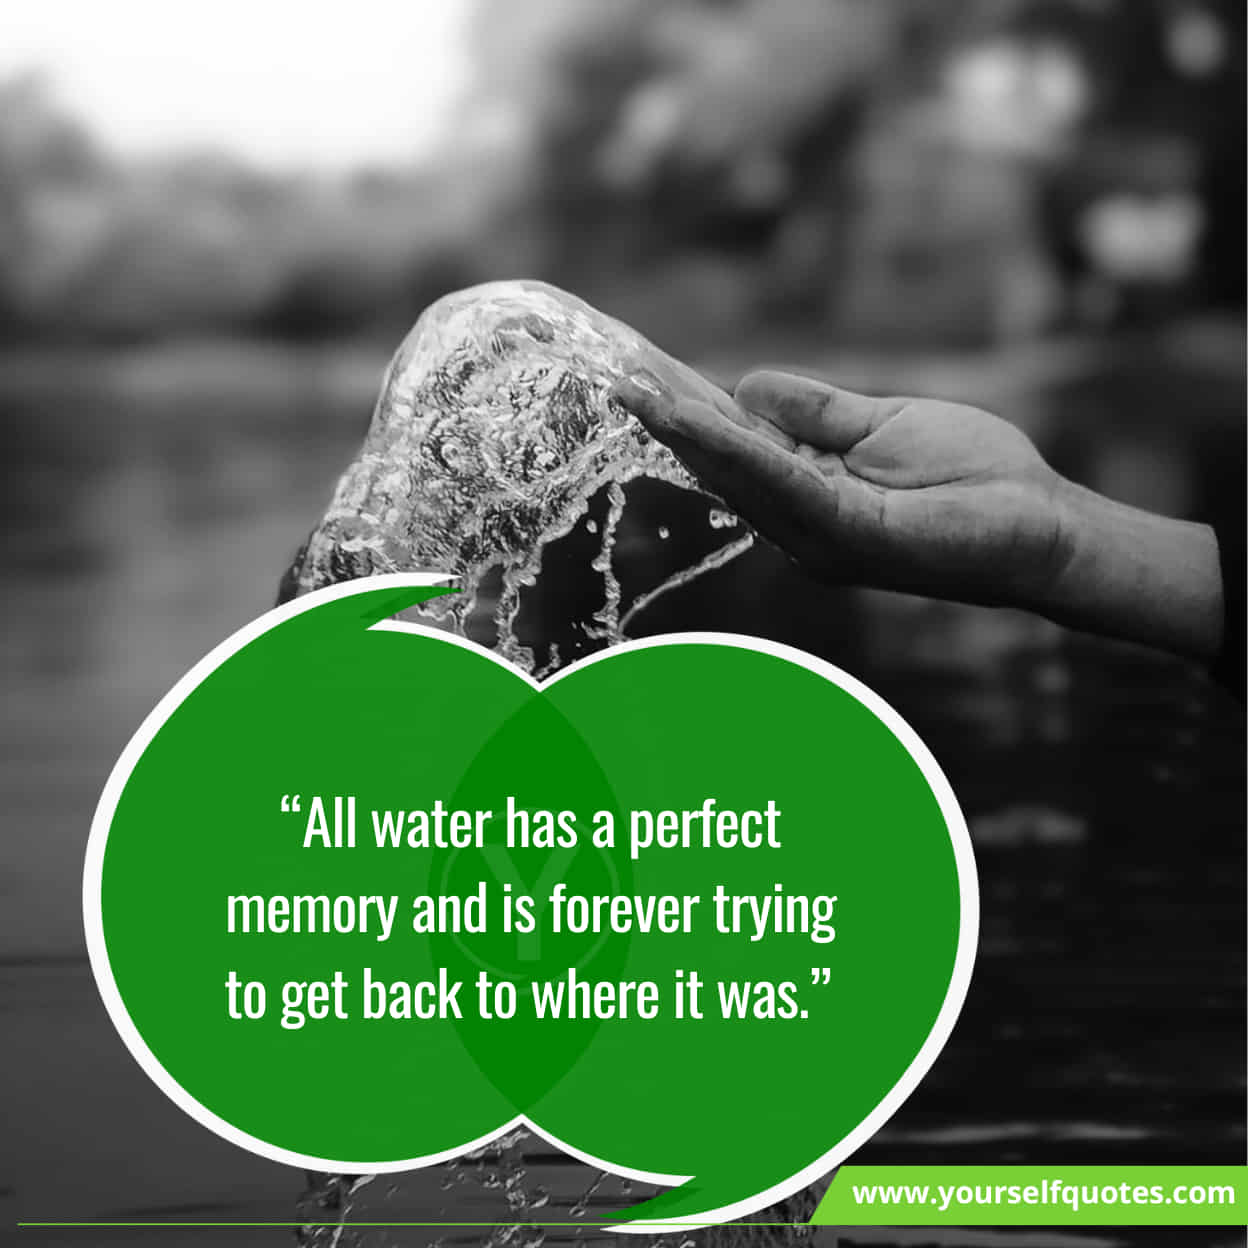 Best Inspiring Quotes About Water